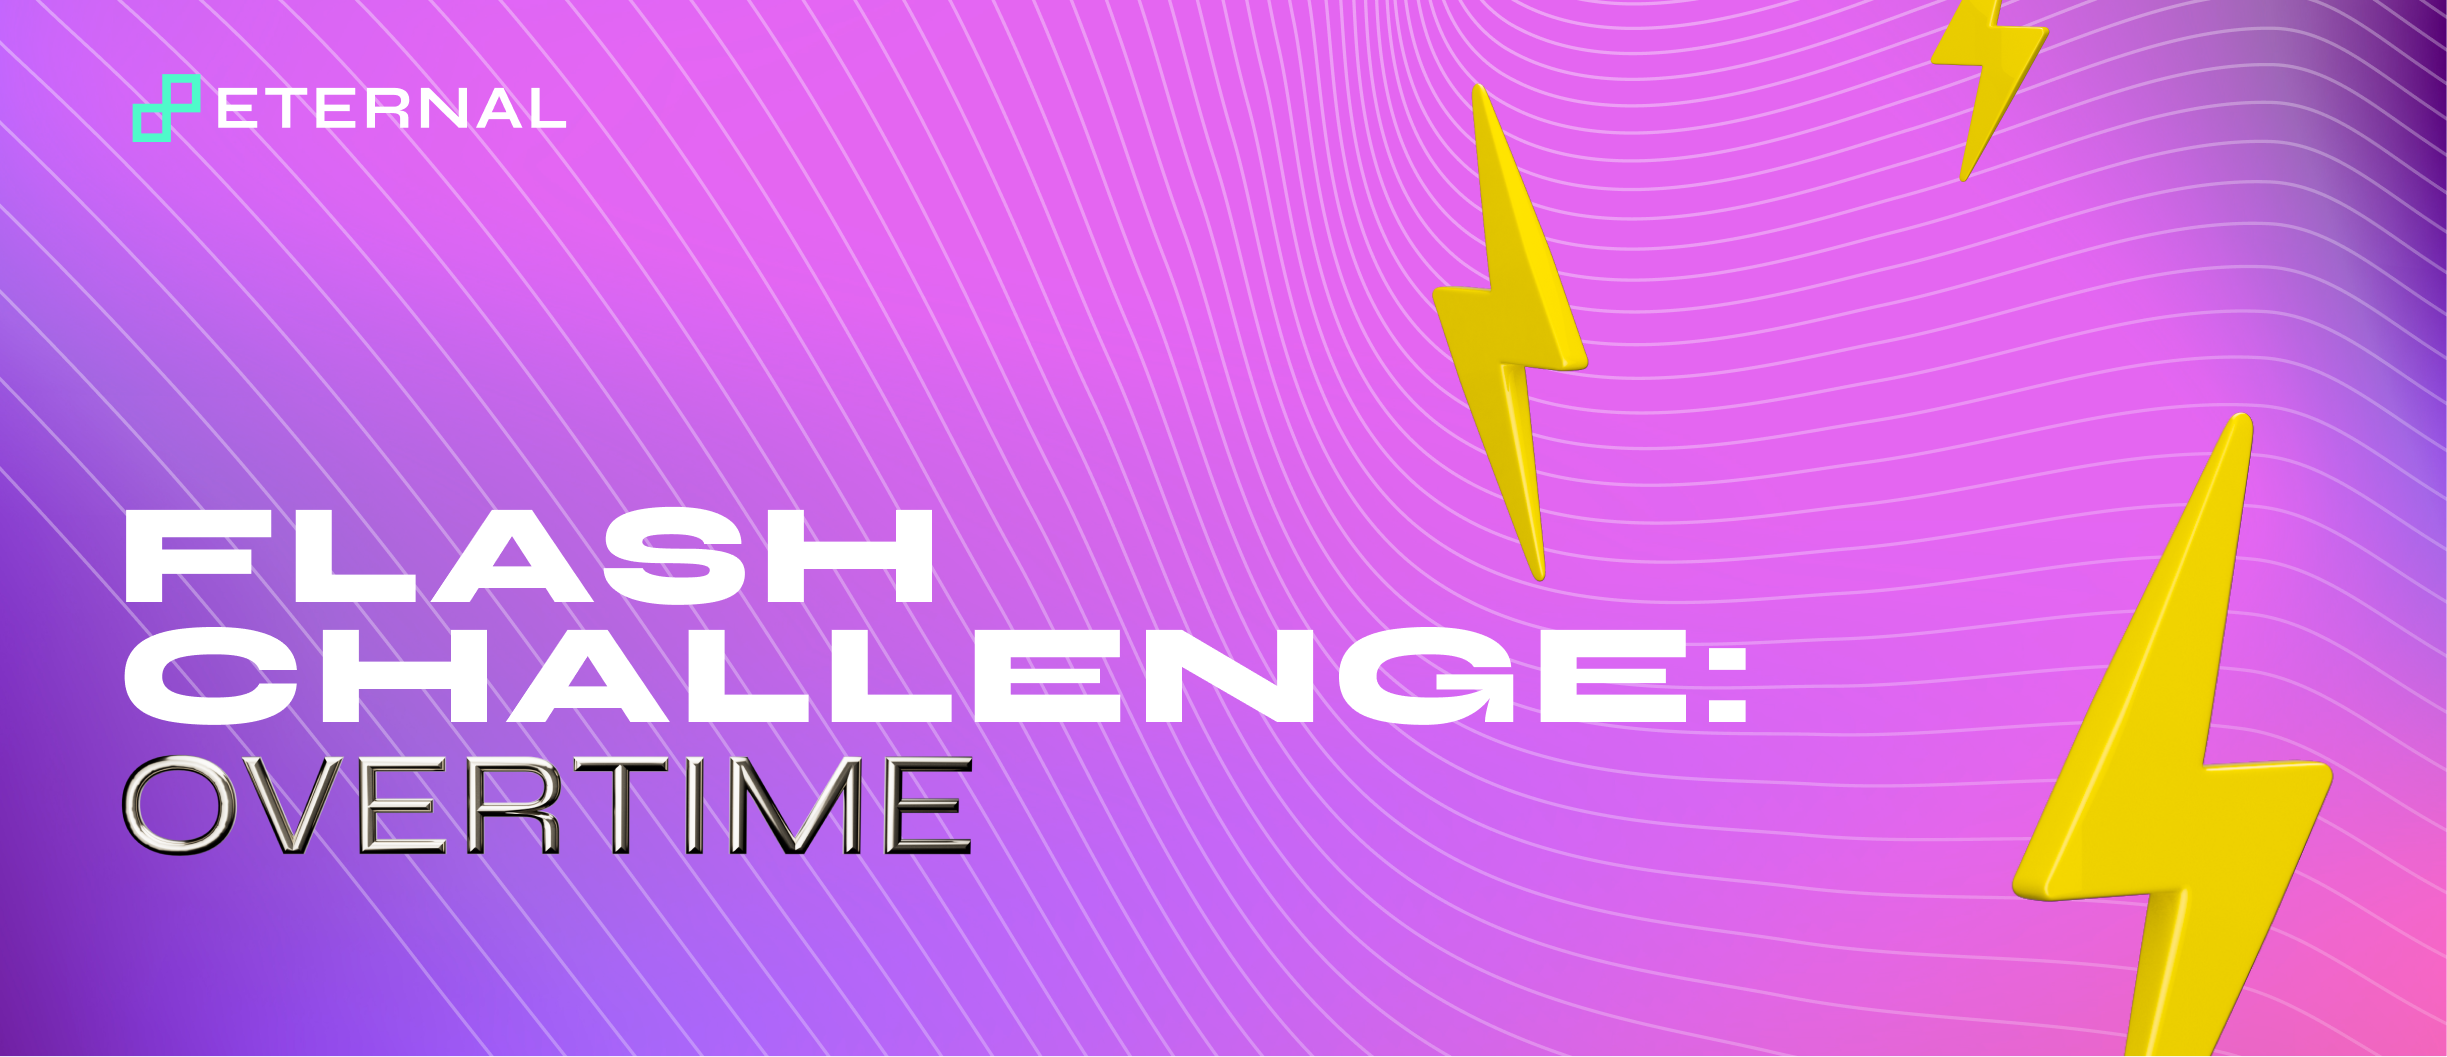 Flash Challenges: Overtime